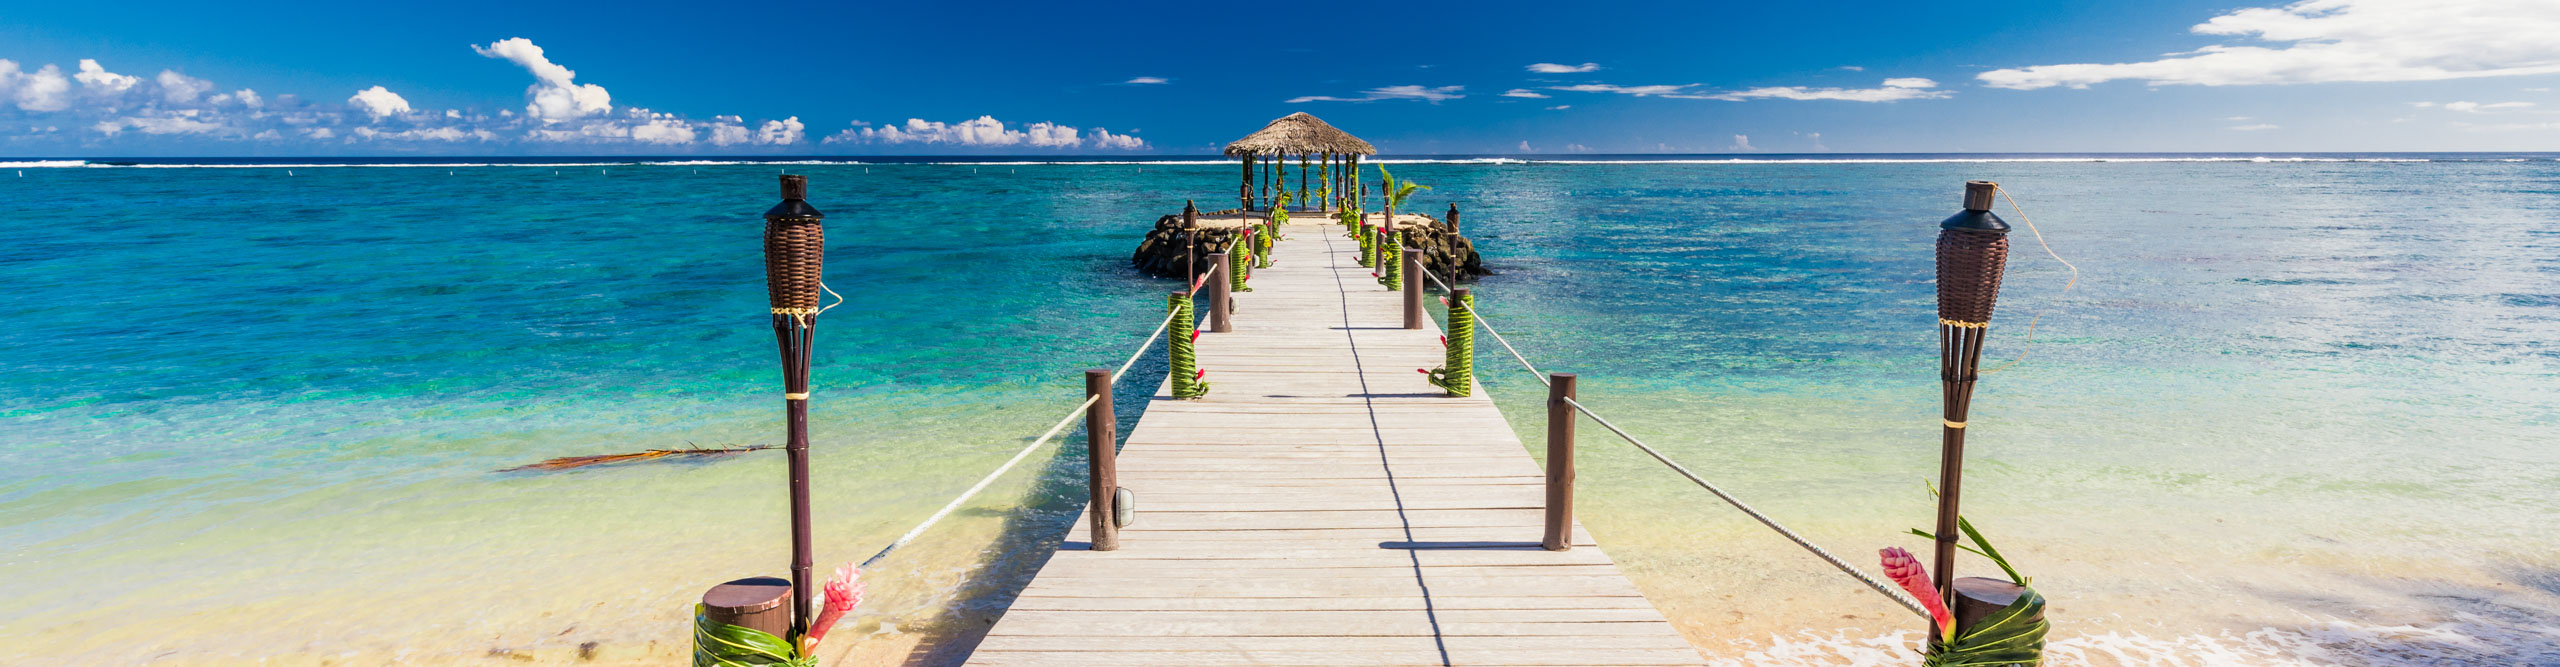 Jetty leading out into the water in Aitutaki, Samoa